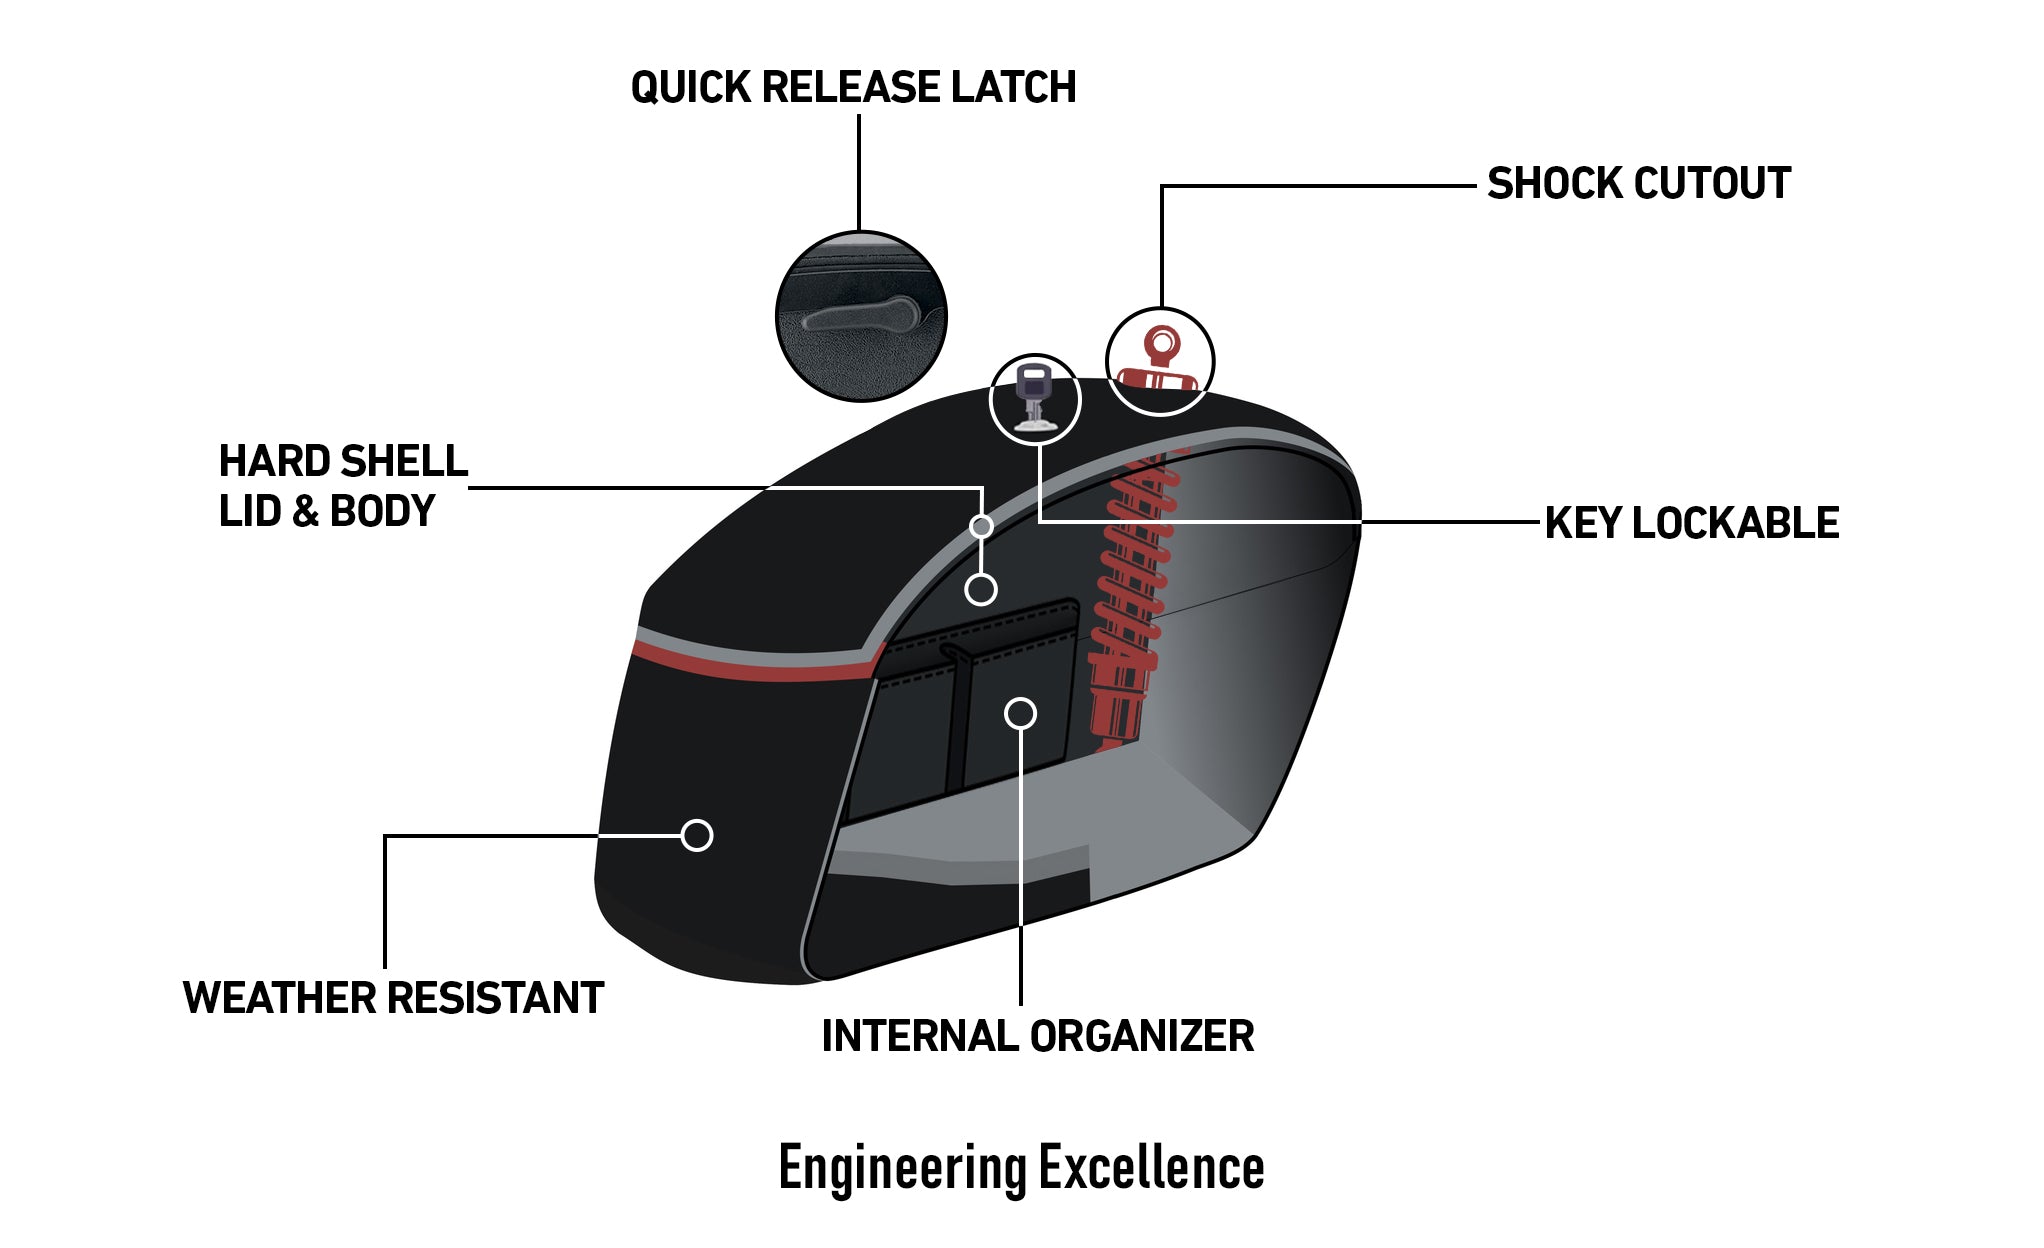 Viking Lamellar Vale Extra Large Shock Cut Out Matte Motorcycle Hard Saddlebags For Harley Dyna Super Glide Fxd I Engineering Excellence with Bag on Bike @expand